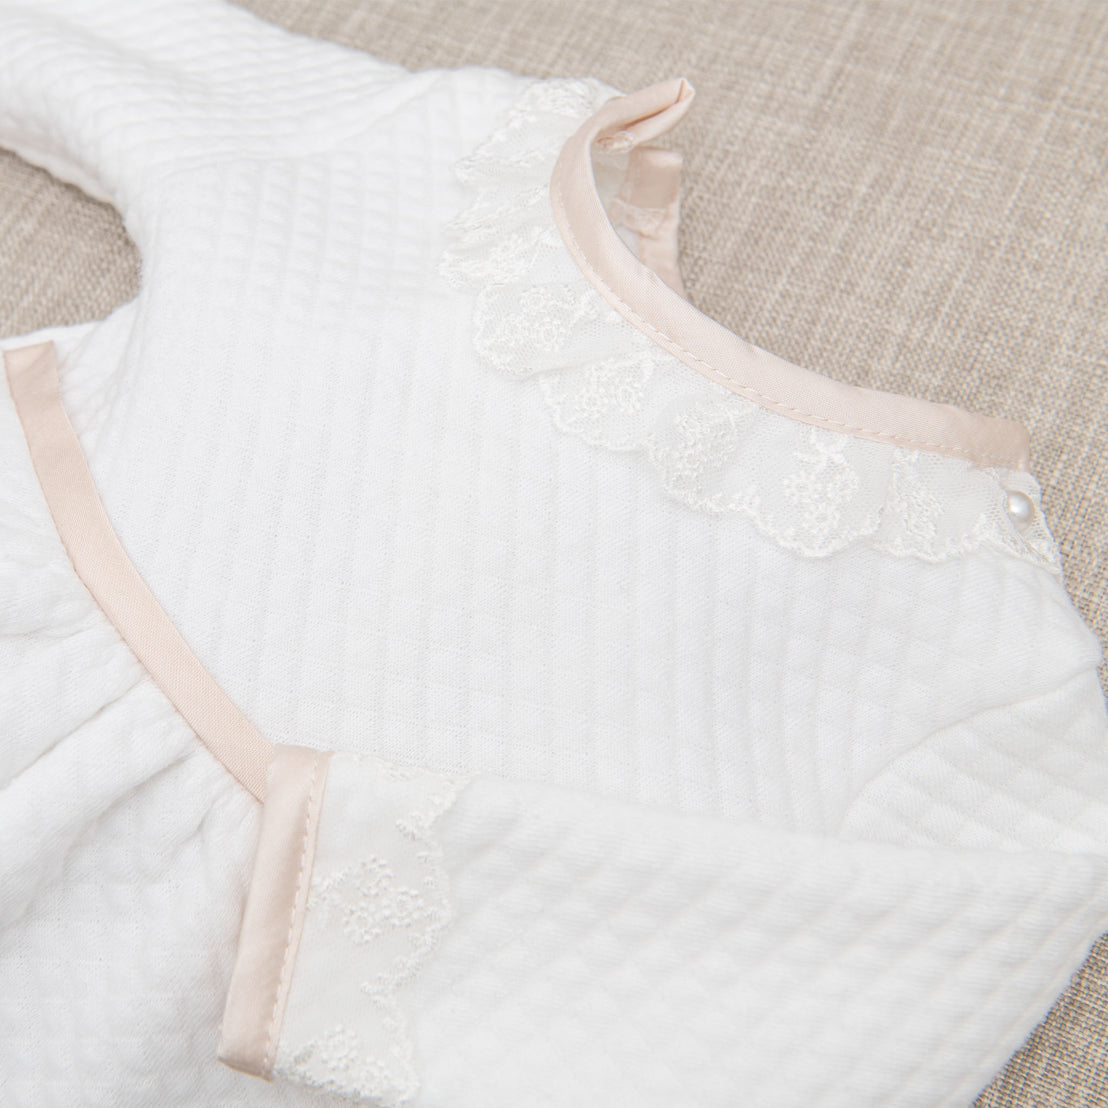 Flat lay photo of the Tessa Quilt Romper showing close up details of the ivory Venice lace along the neck.